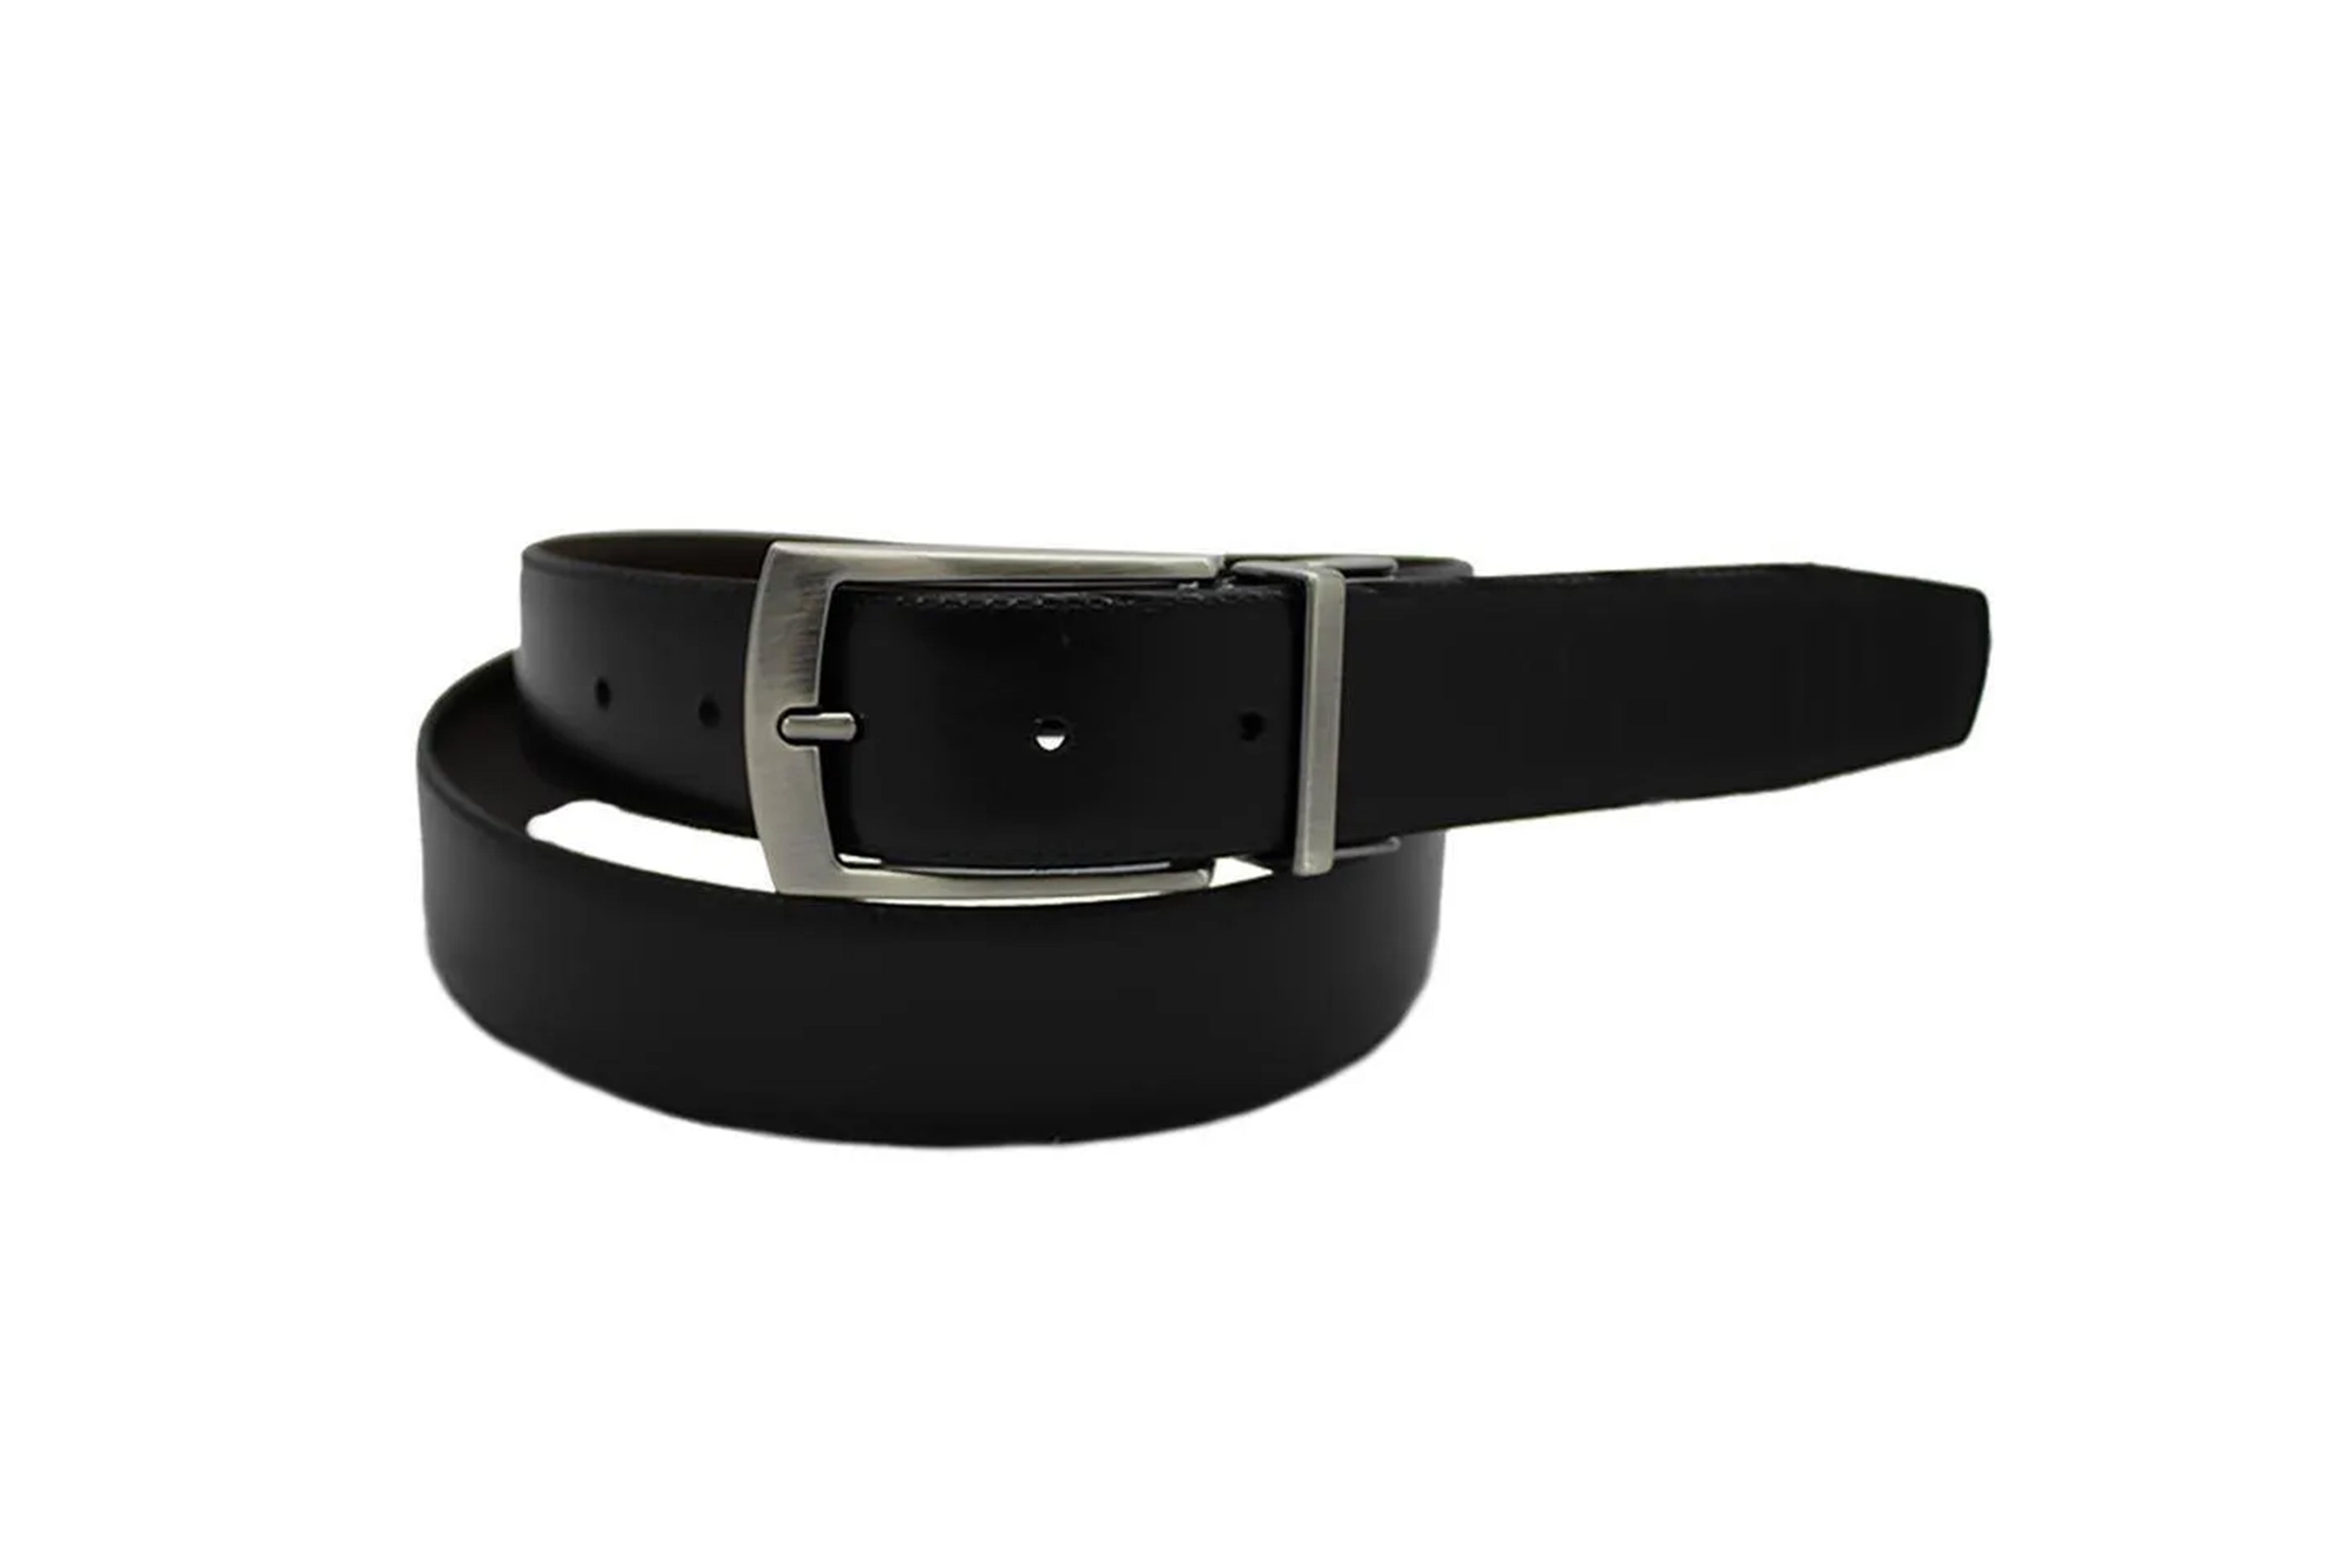 Social Double Face Belt - Black with Coffee Brown